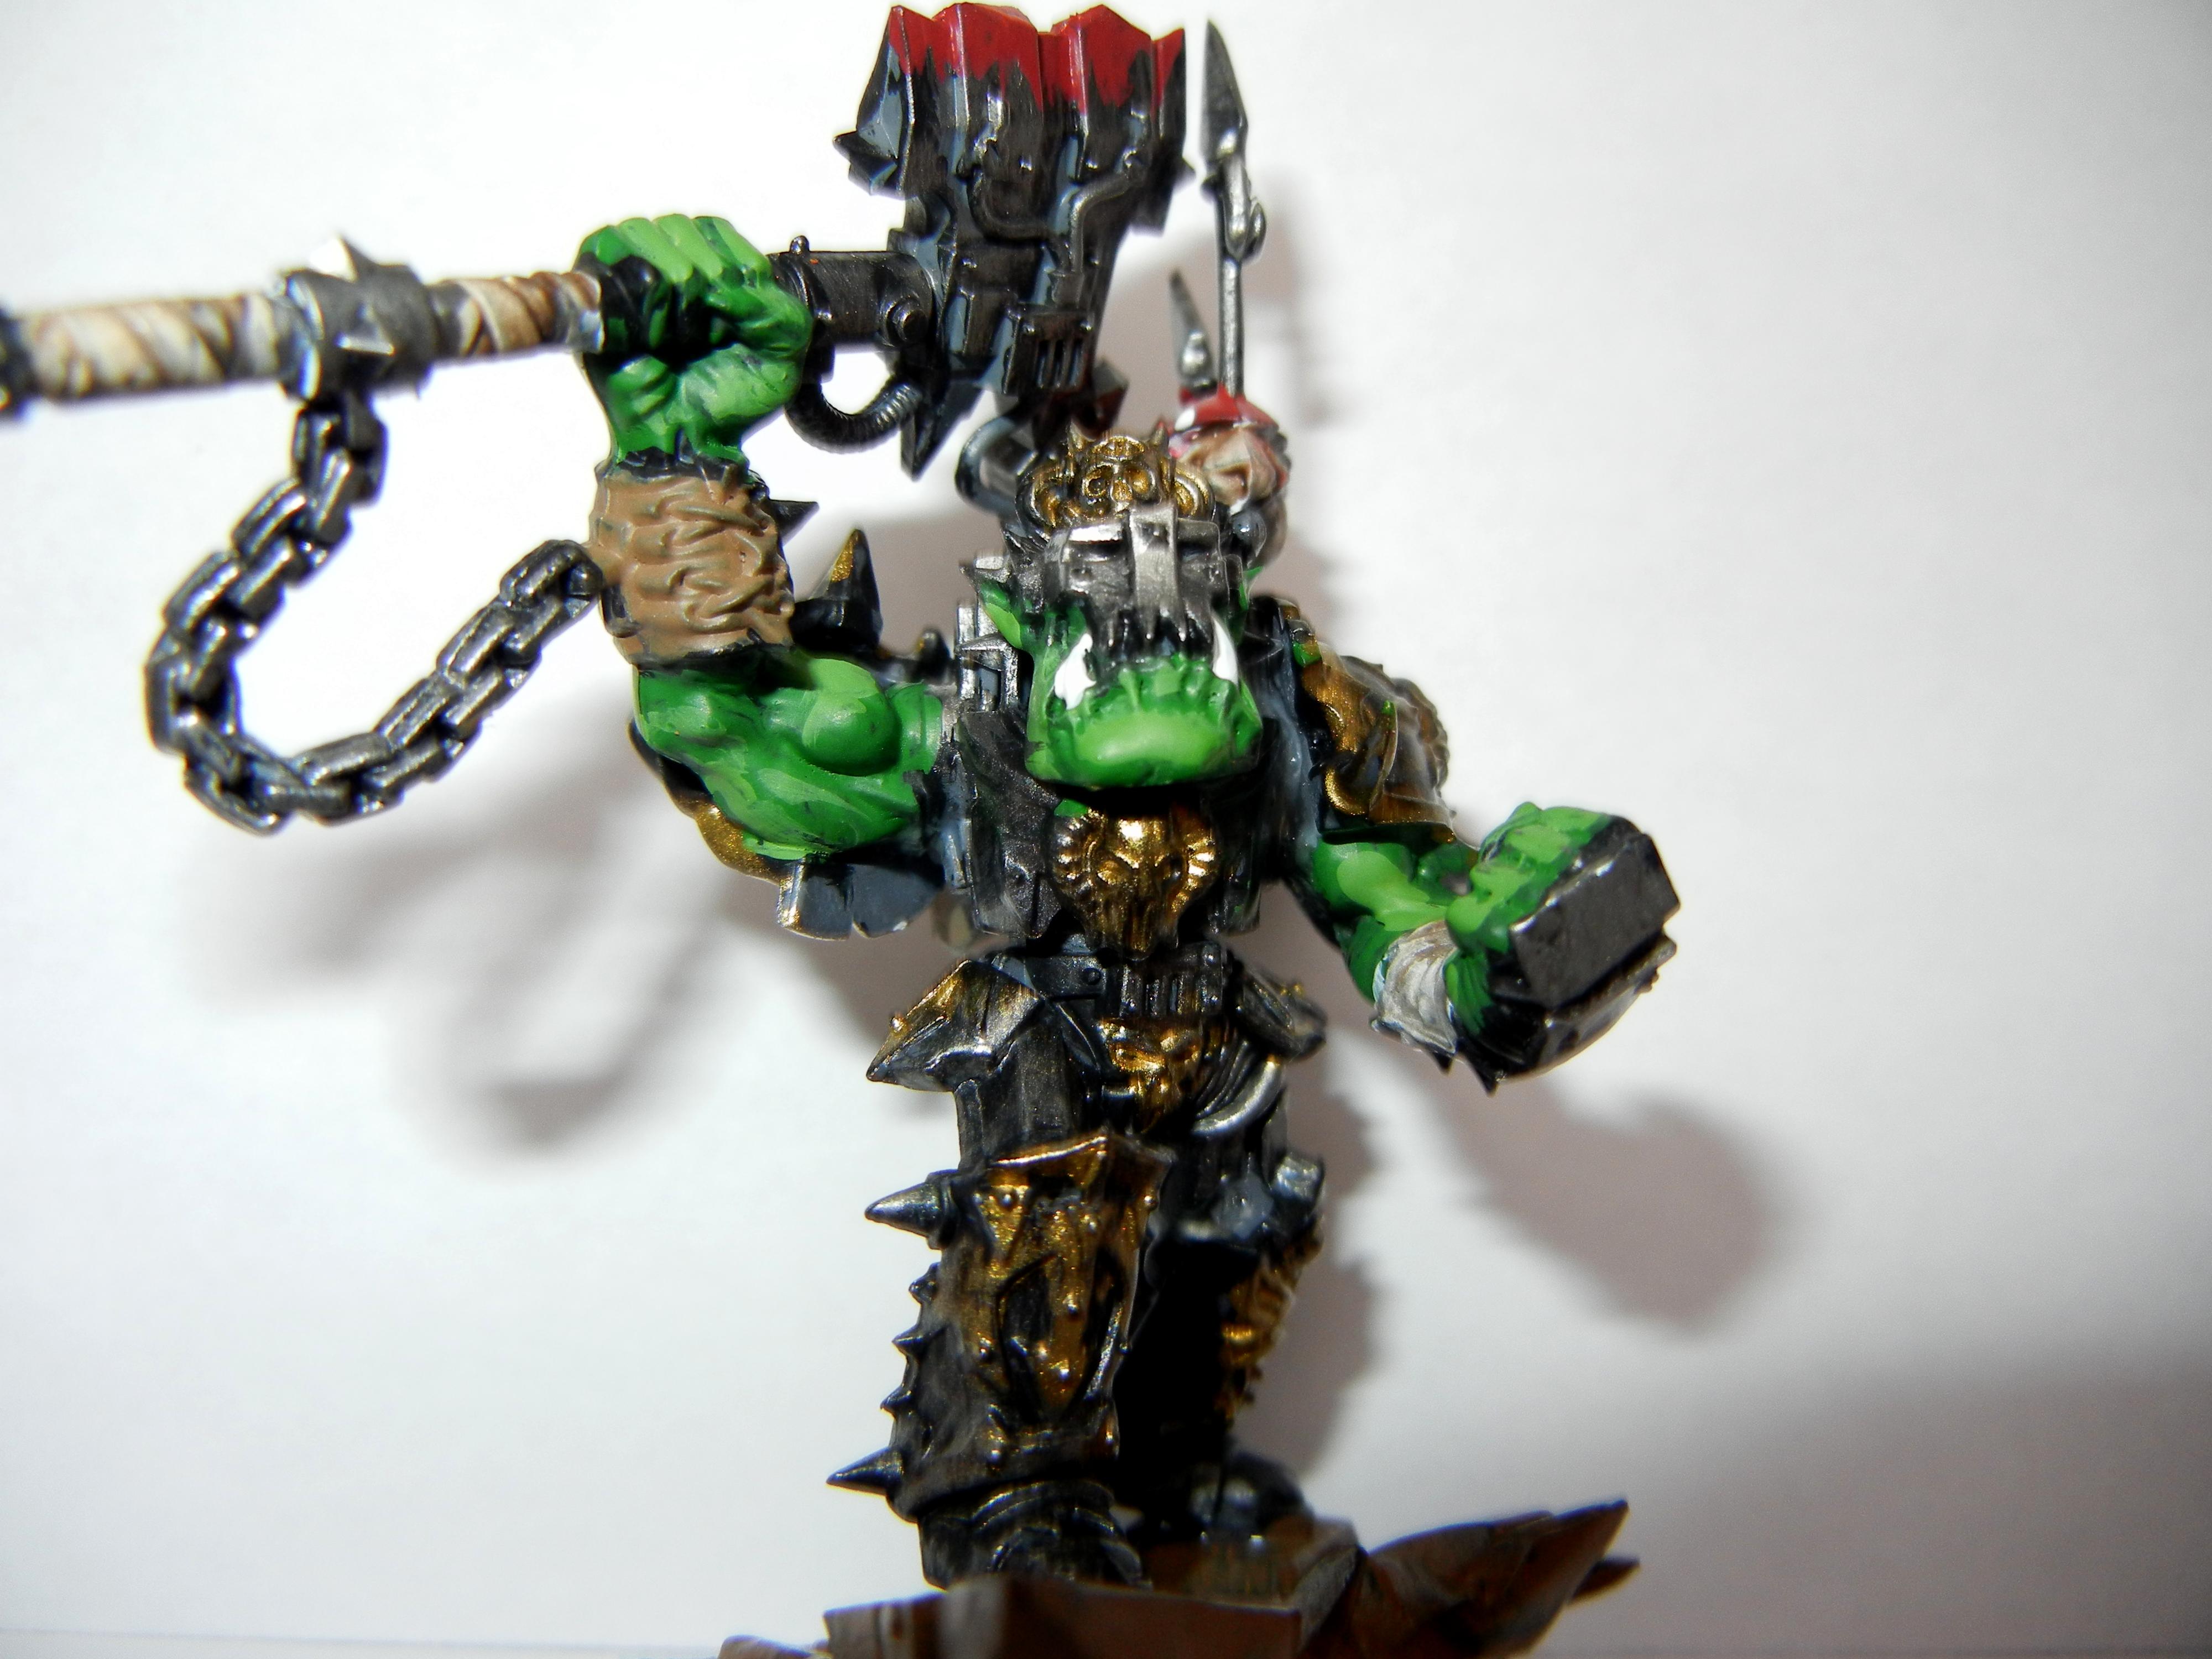 Armored, Chaos, Mega, Orks, Warboss